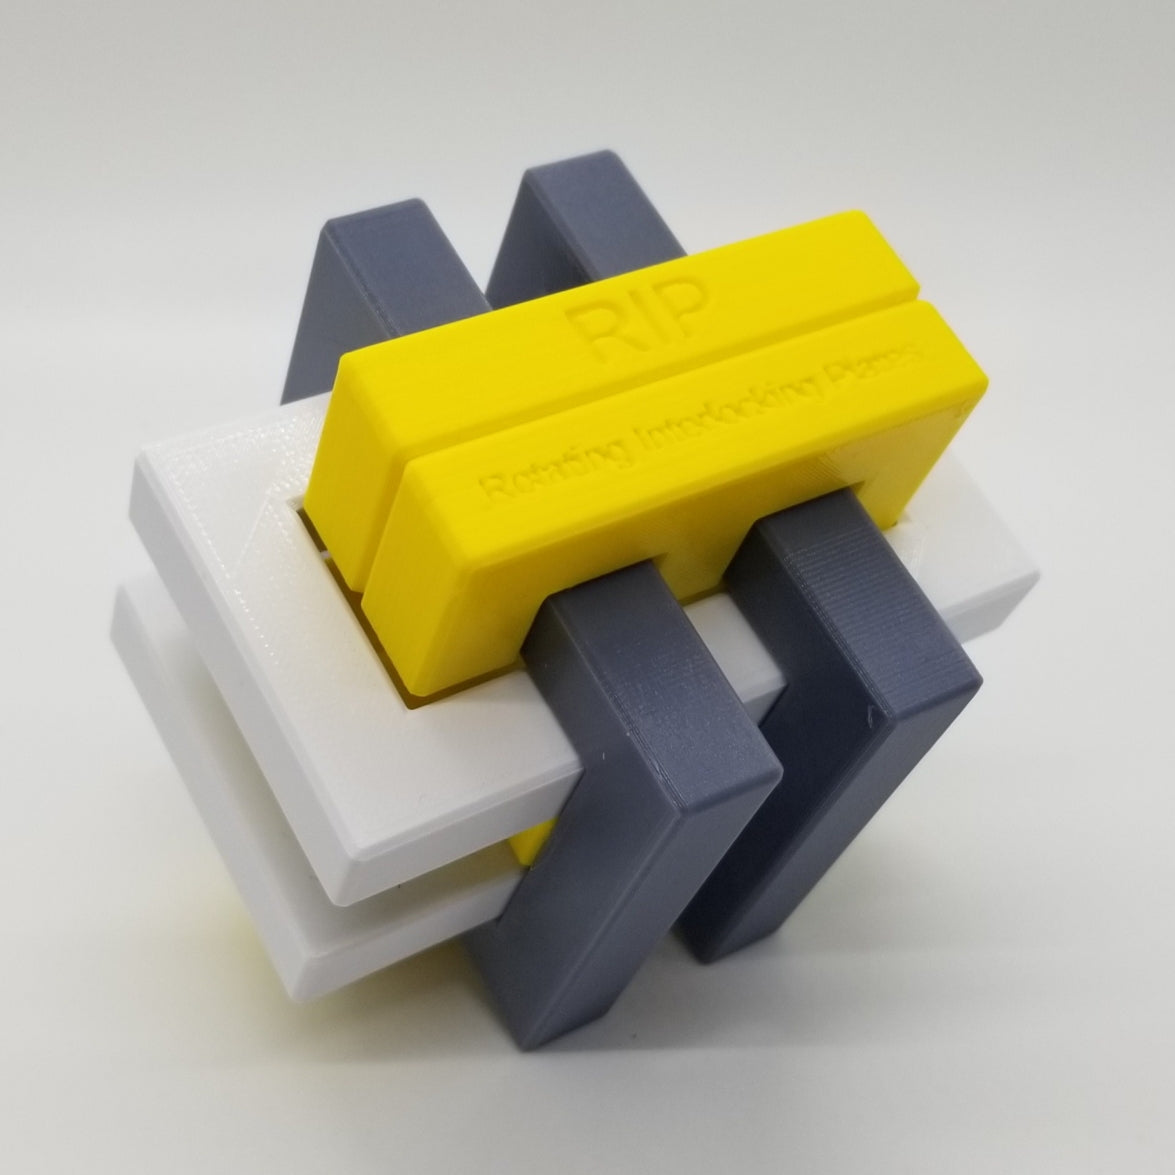 Download 3D Printable STL Files for 5 RIP (Rotating Interlocking Plate) Puzzles